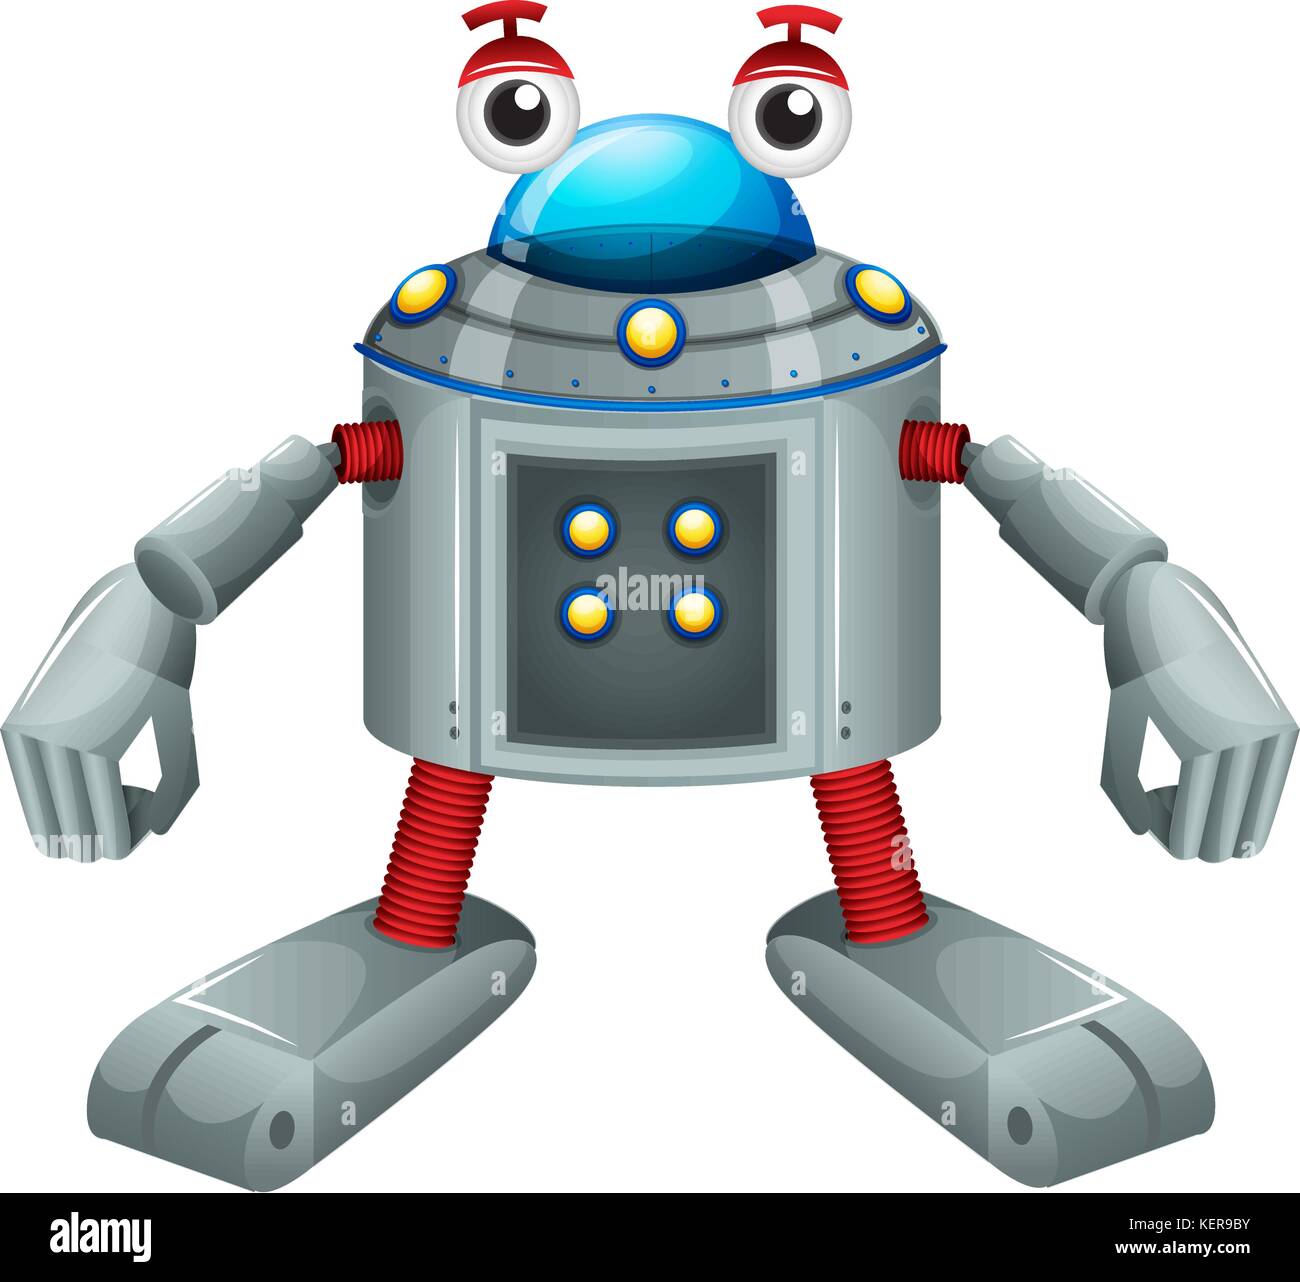 Illustration of a cute gray robot on a white background Stock Vector